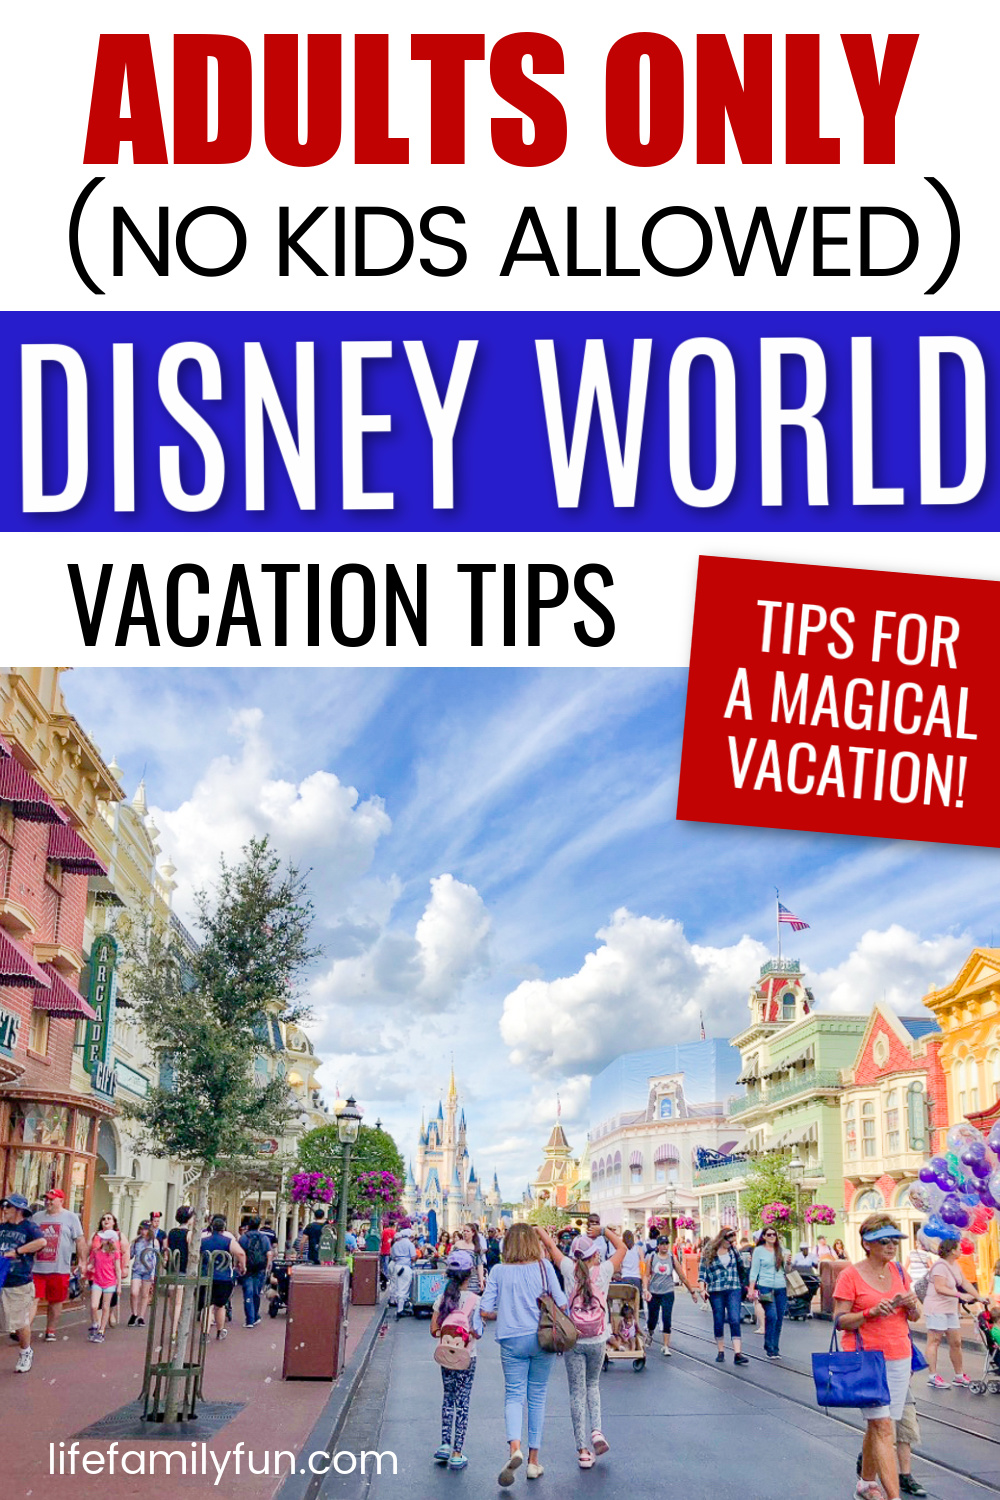 Adults Only for Disney World - Pin for Pinterest